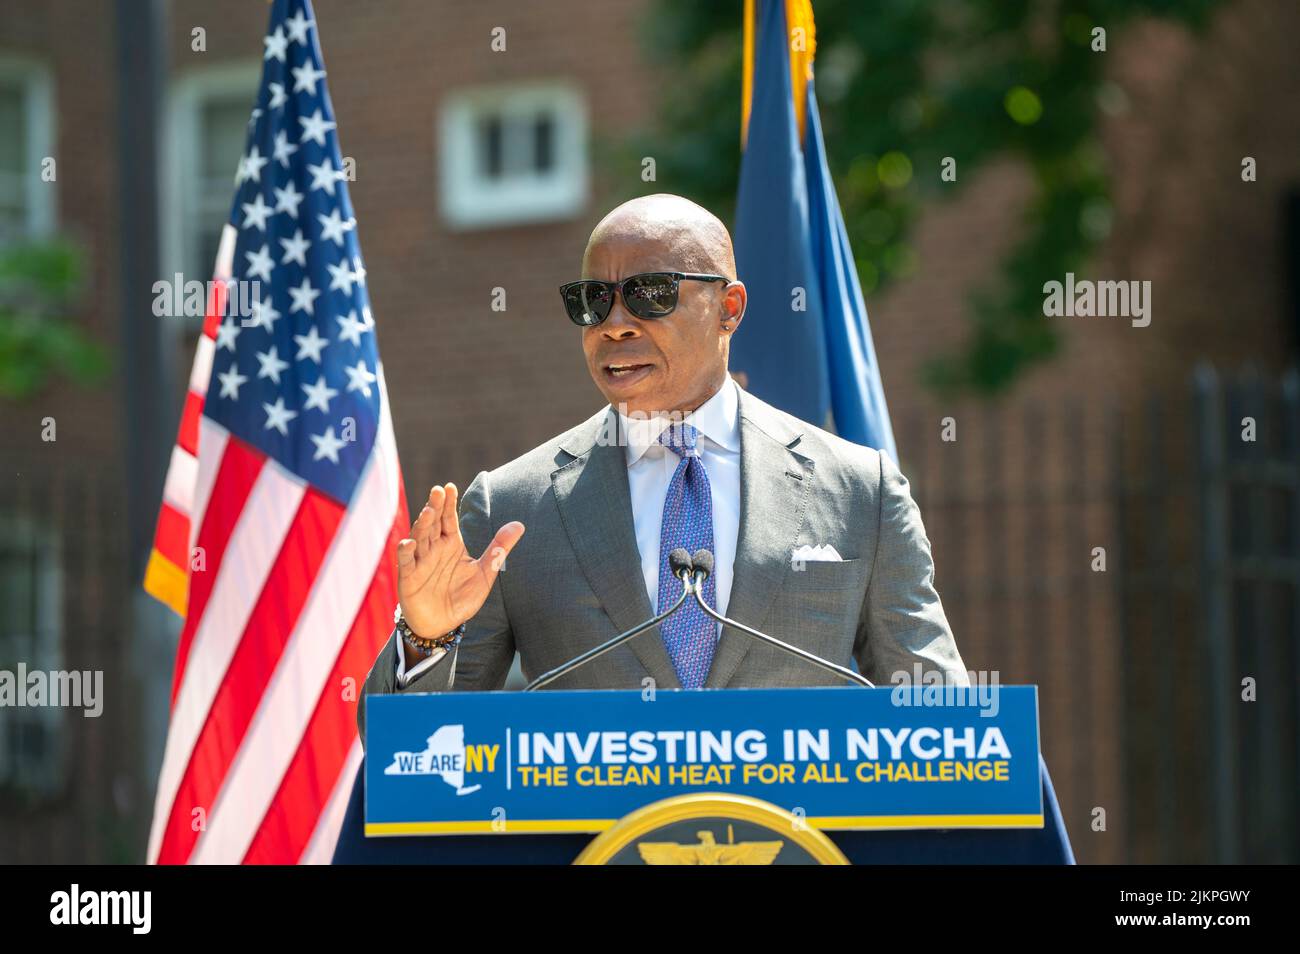 Mayor Eric Adams speaks during a joint housing and clean energy-related announcement at Woodside Houses NYCHA complex in Queens Borough of New York City. Governor Hochul and Mayor Adams announce $70 million initial investment to decarbonize NYCHA buildings as part of clean heat for all challenge. The plan calls for the installation of what's called an 'electric heat pump', developed by NYPA selected Midea America and Gradient, in 30,000 units, which would provide tenants in each apartment with the ability to control the heat or keep their units cool throughout the year. (Photo by Ron Adar / SO Stock Photo